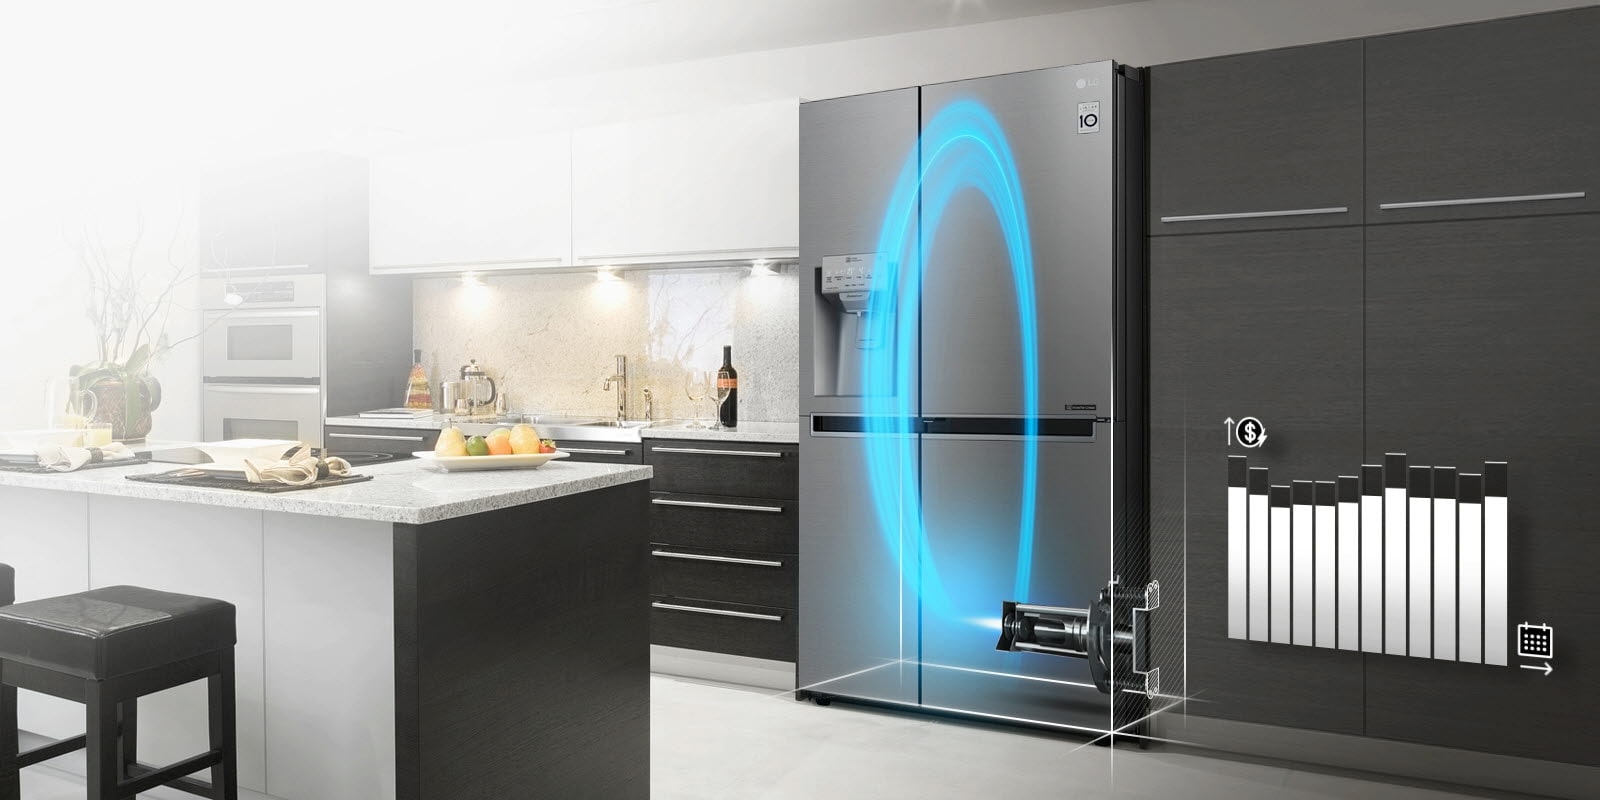 The refrigerator is installed in a kitchen and the exterior is see-through to allow seeing inside to the LG Inverter Linear Compressor which is lit up blue and making a circle inside.A line graph representing money saved over time starts high and then settles lower to show this refrigerator saves money.